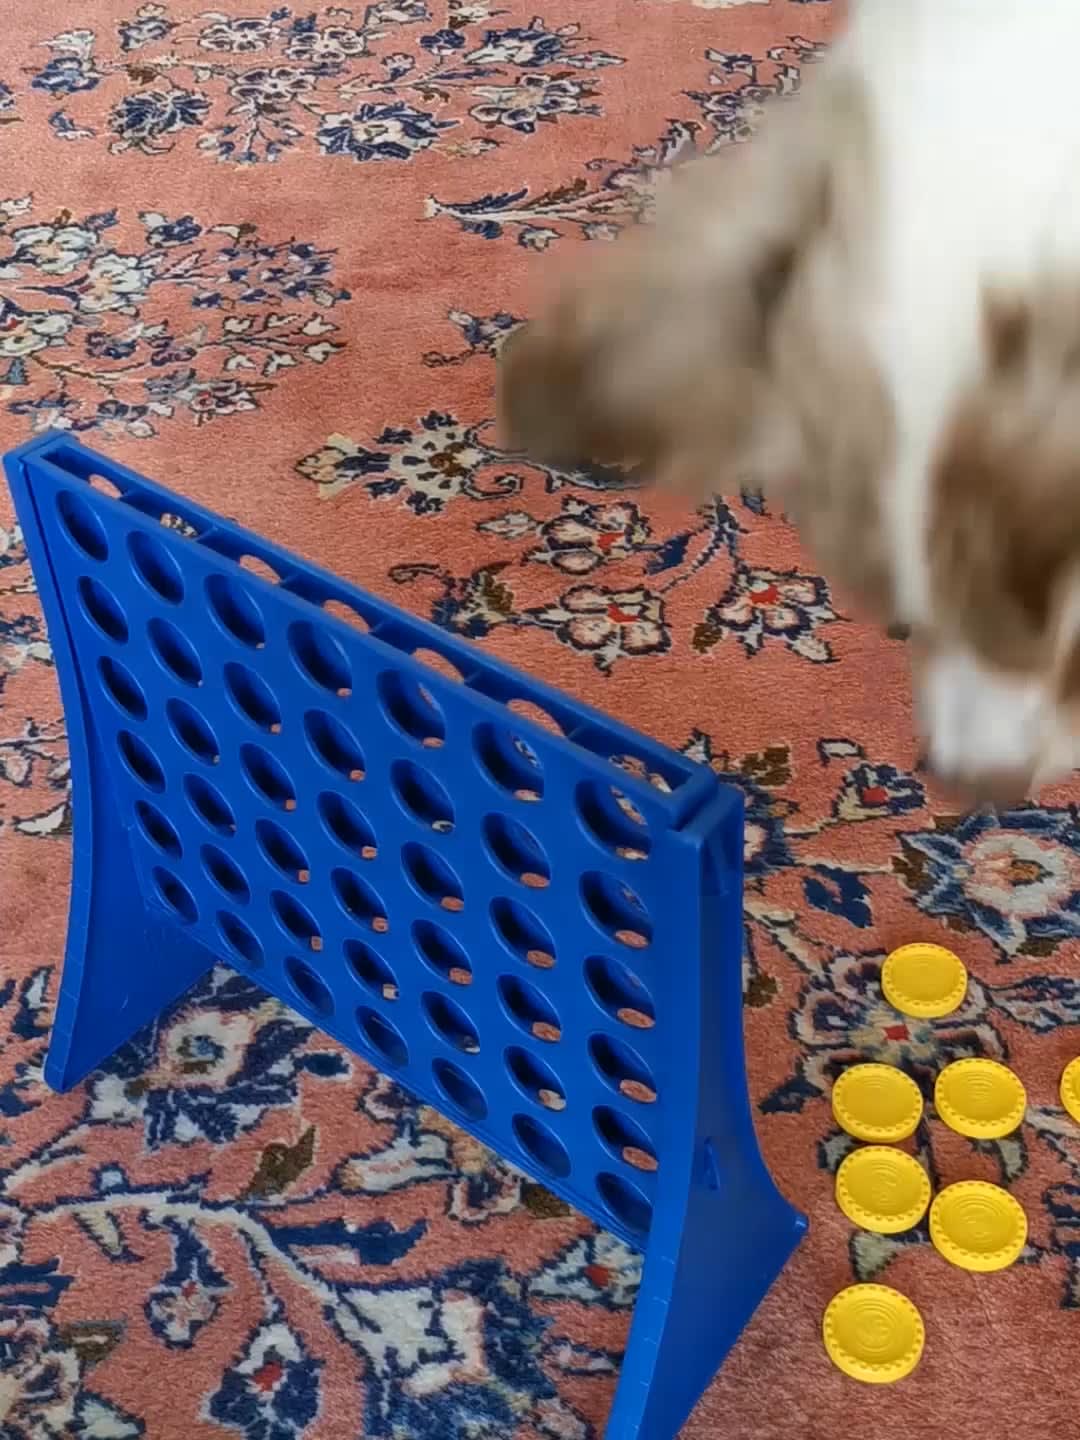 My dogs reaction playing connect 4